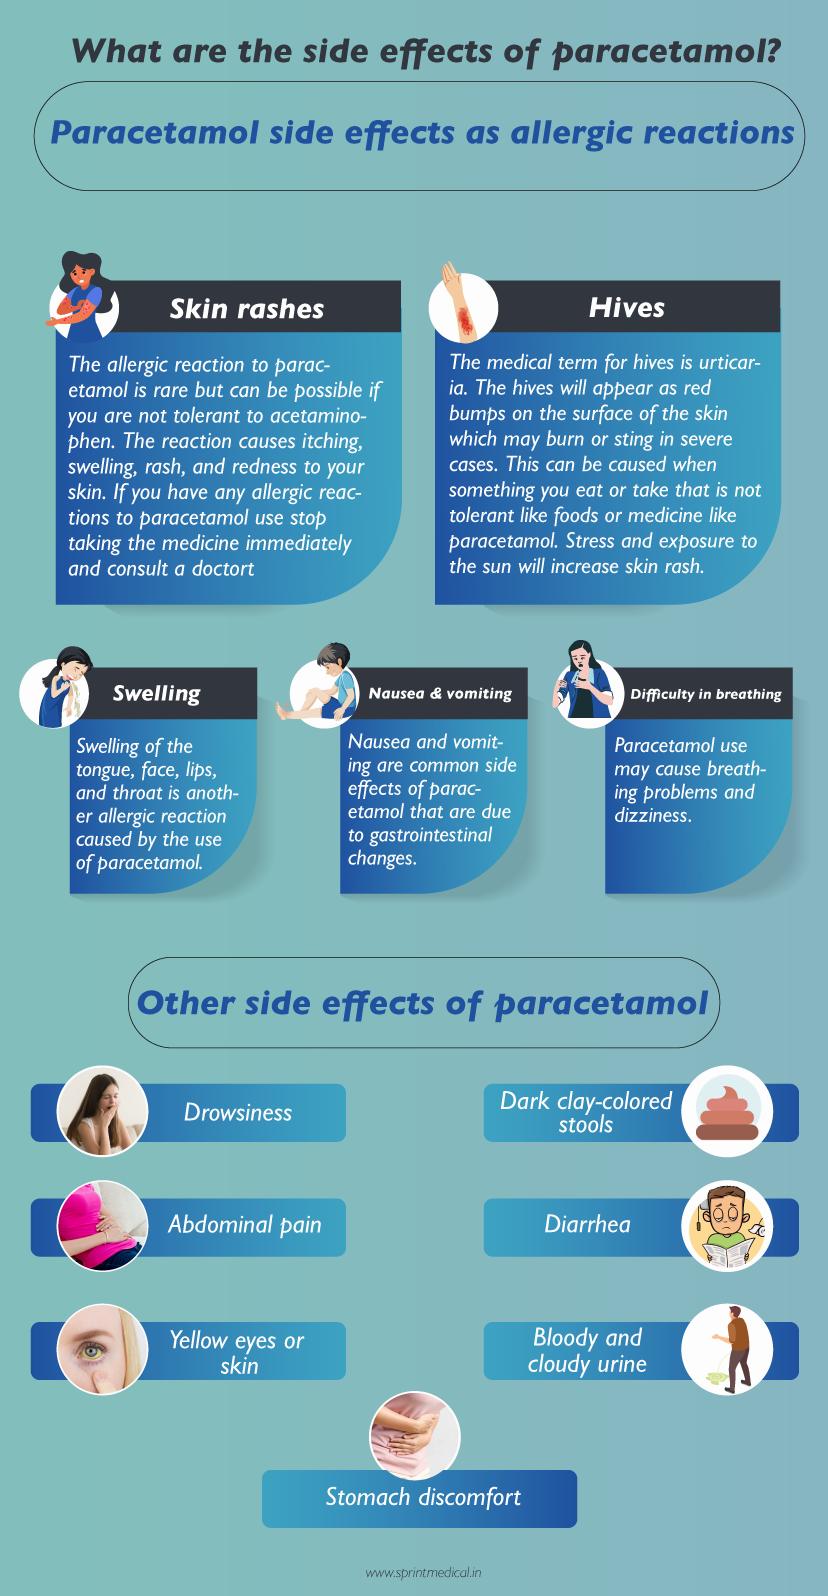 The image lists the side effects of paracetamol, which include skin rashes, hives, swelling, nausea, vomiting, difficulty breathing, drowsiness, dark clay-colored stools, abdominal pain, diarrhea, yellow eyes or skin, bloody and cloudy urine, and stomach discomfort.